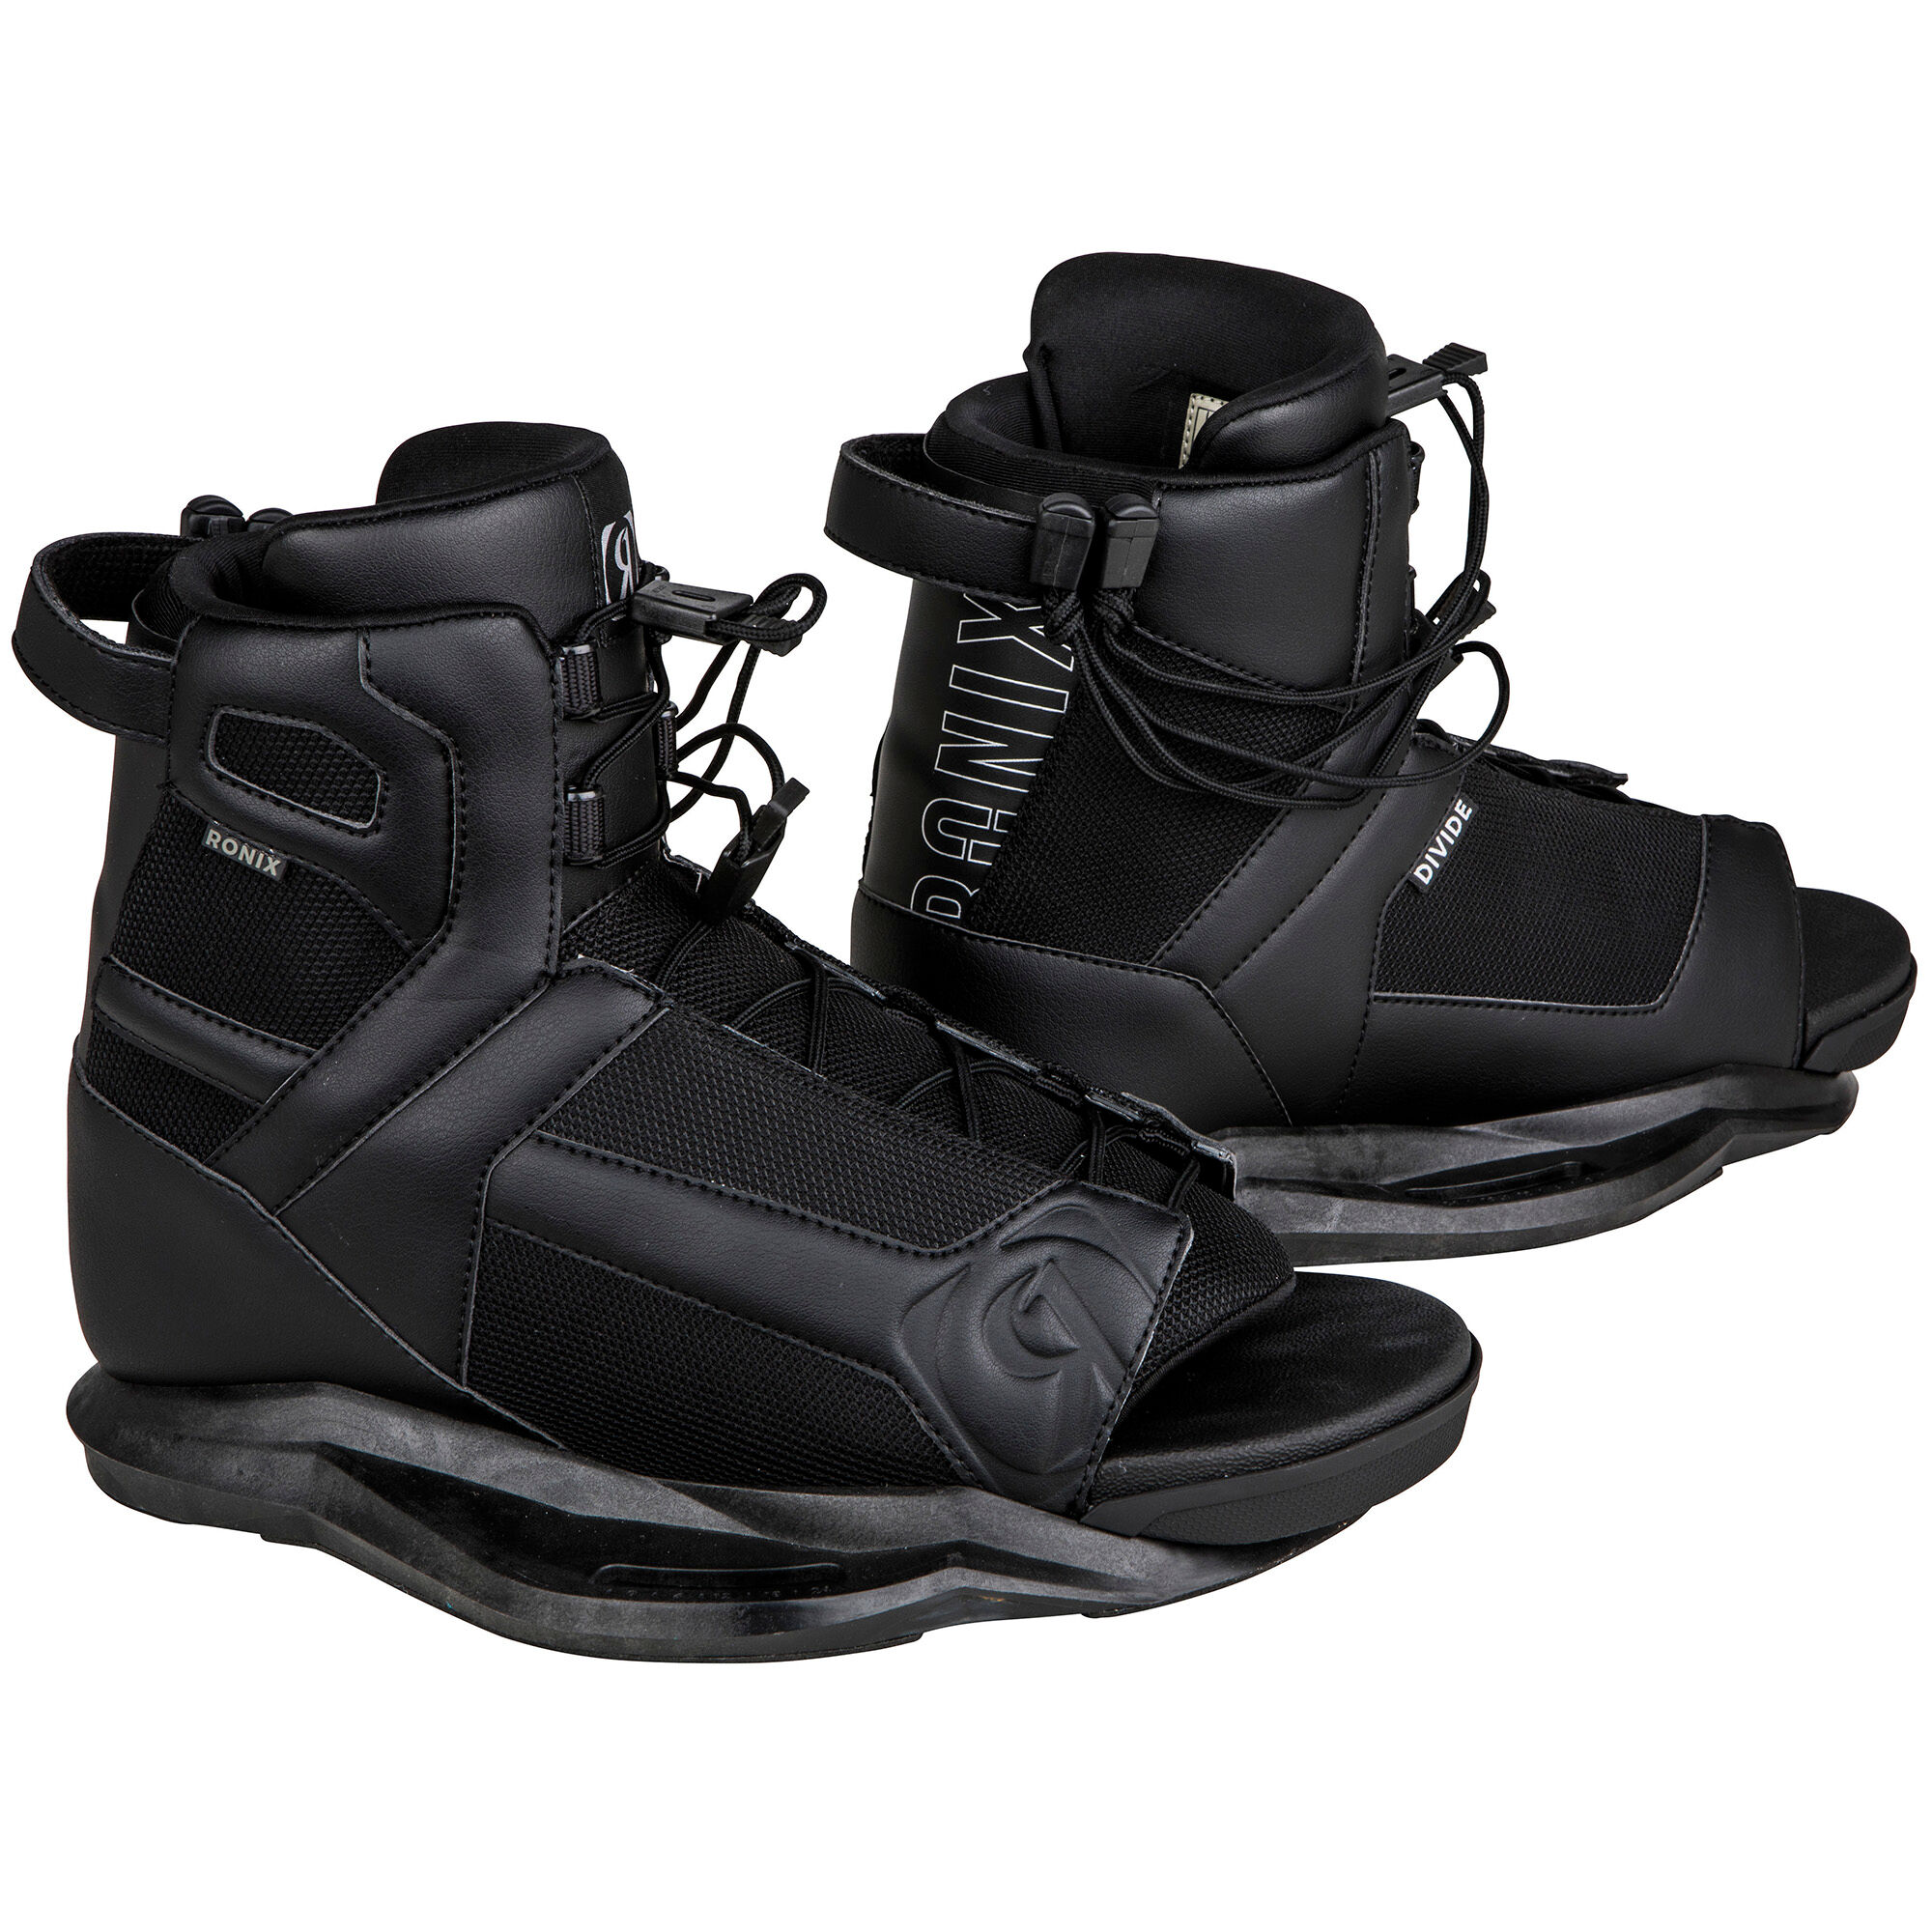 Photos - Other for Swimming Ronix Divide Wakeboard Boots 193127p 